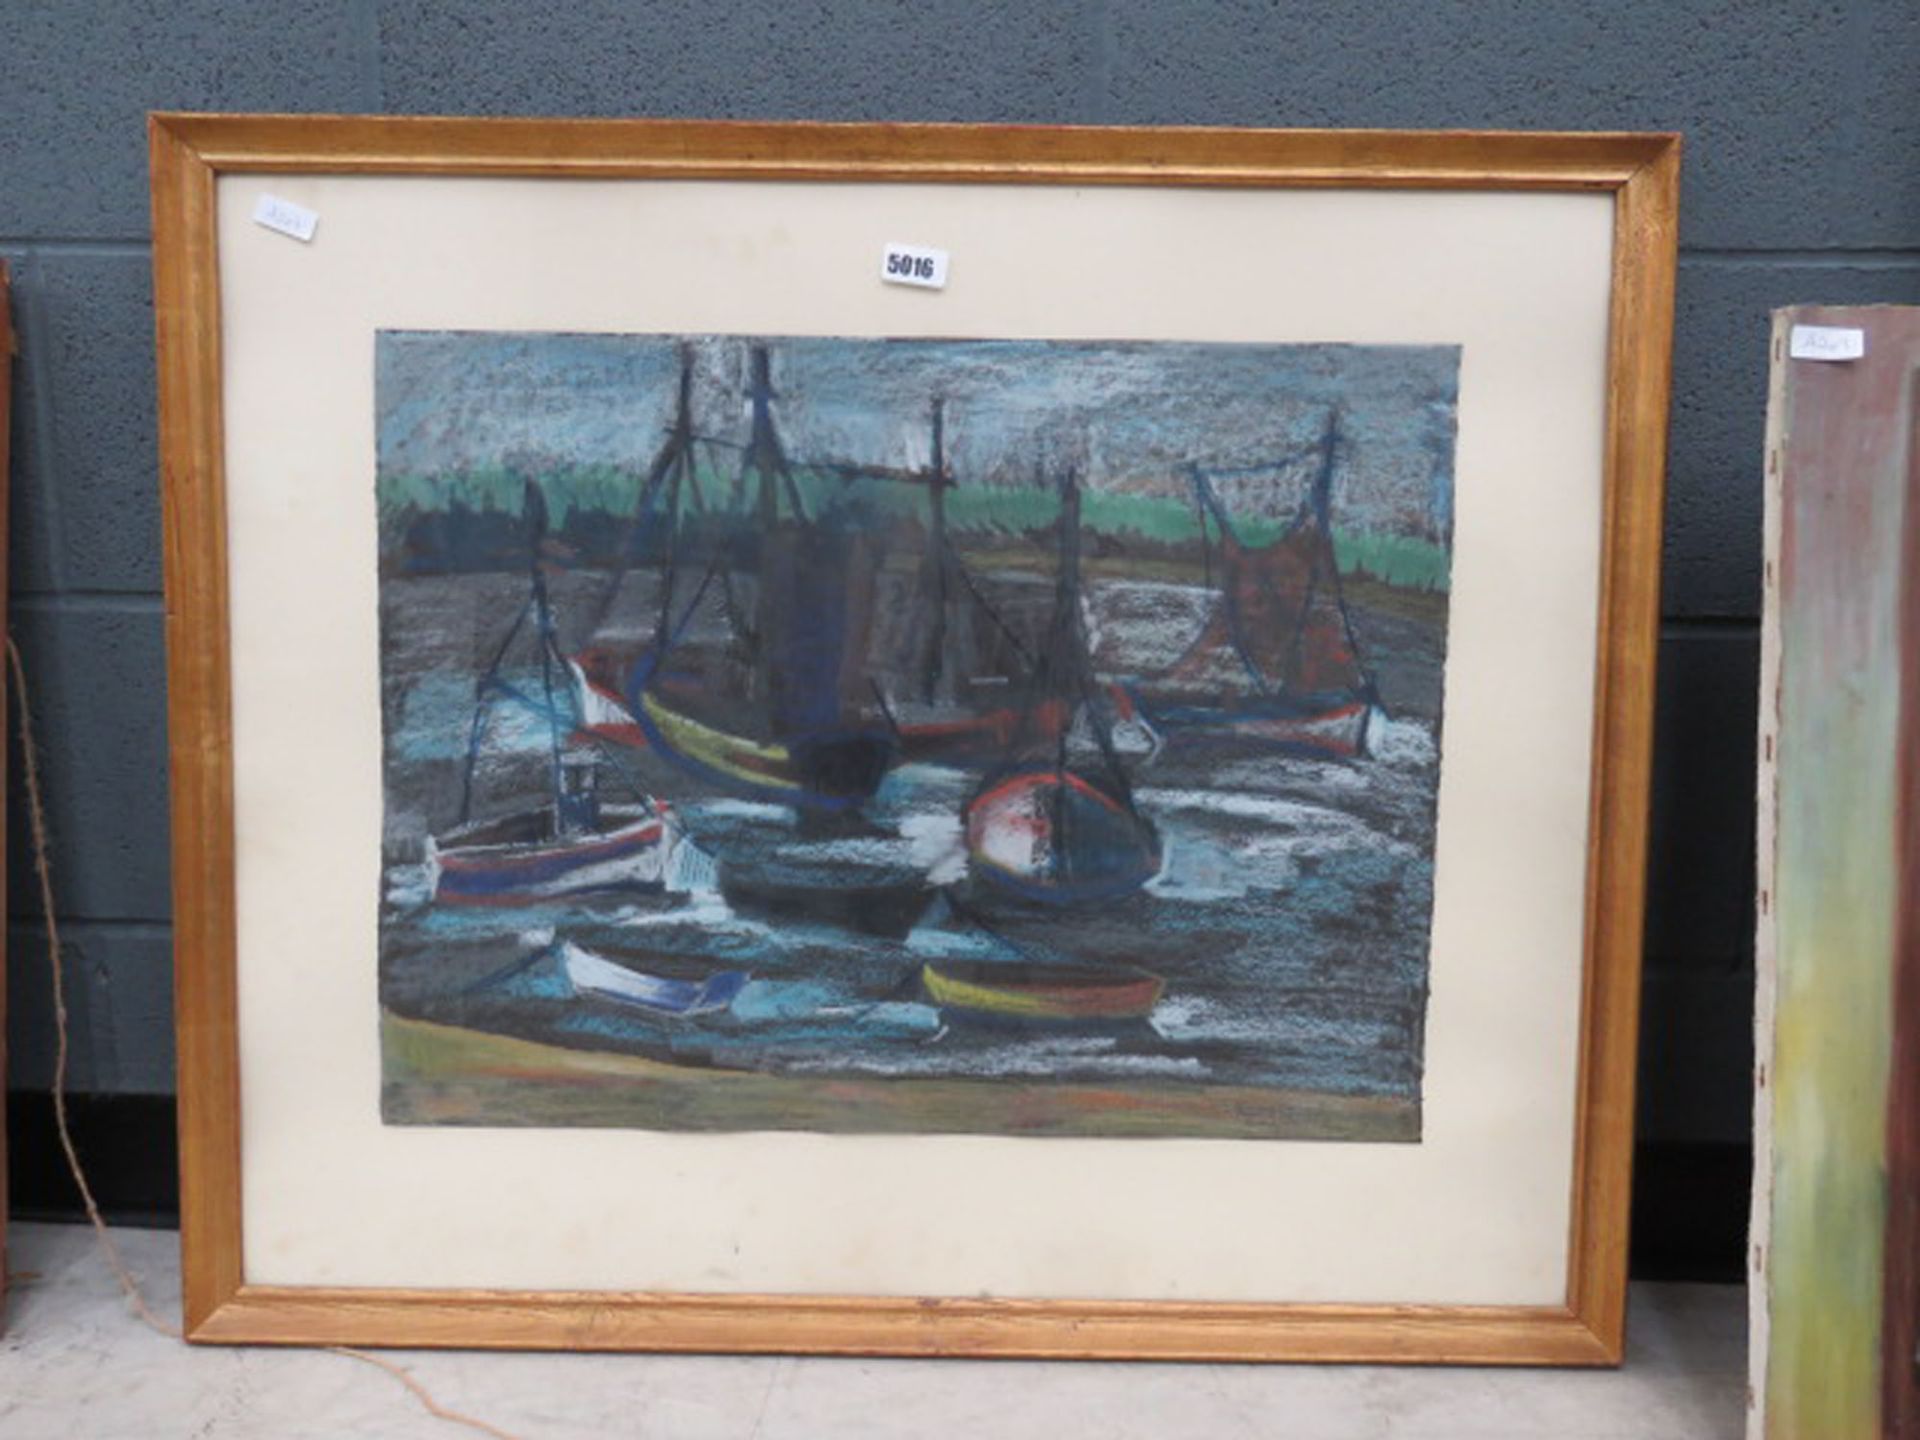 Pastel drawing of boats in harbour